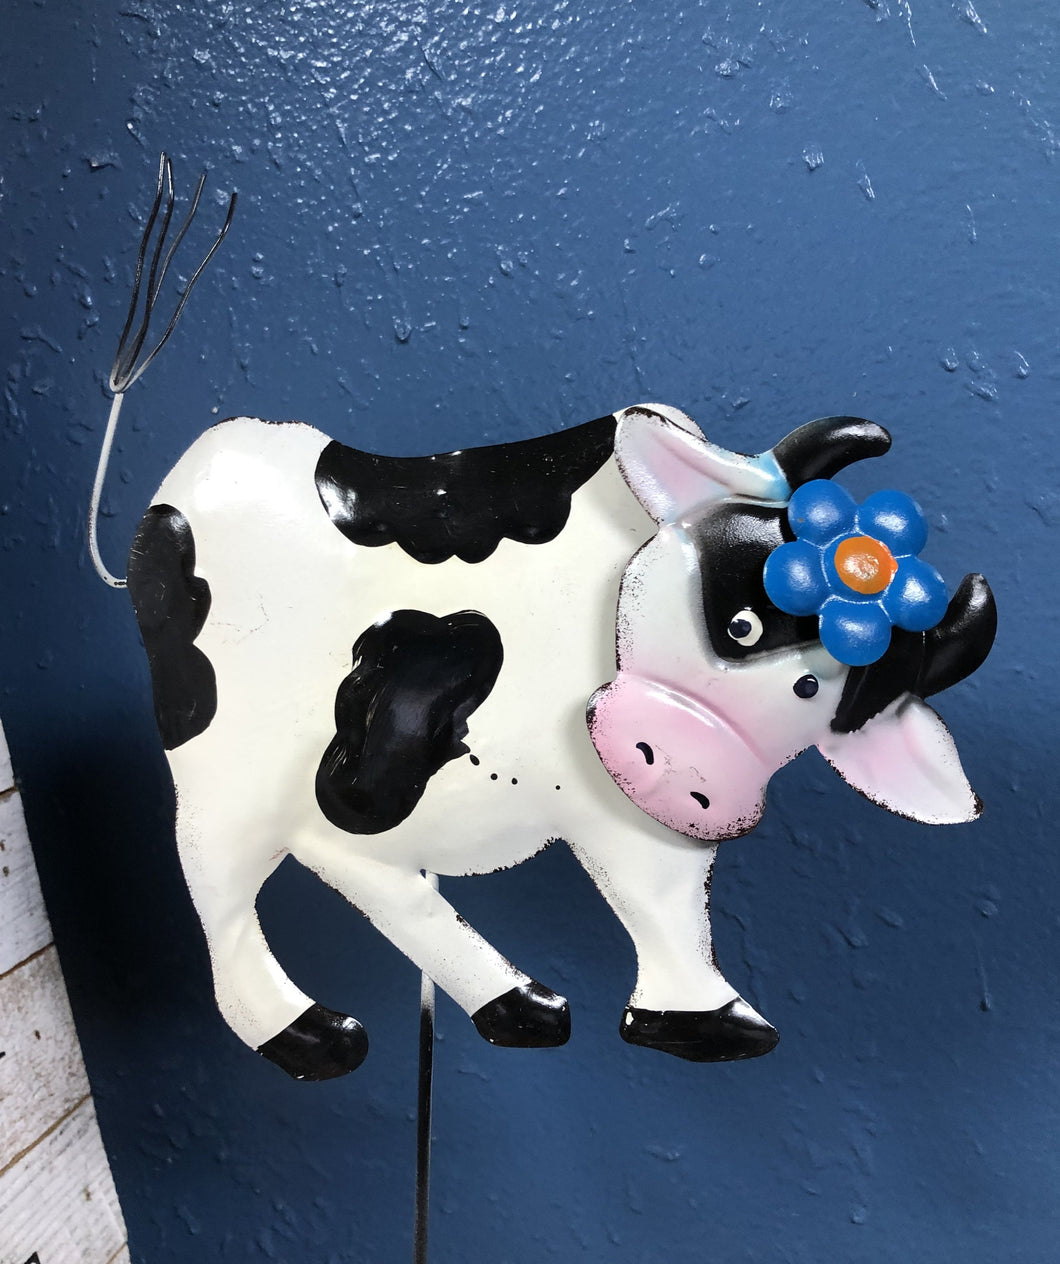 METAL COW 6 INCHES TALL BY 8 INCHES WIDE ON A METAL STAKE. COLORS ARE BLACK AND WHITE COW WITH BLACK HORNS AND A BLUE FLOWER ON ITS HEAD, AGAINST A BLUE WALL.